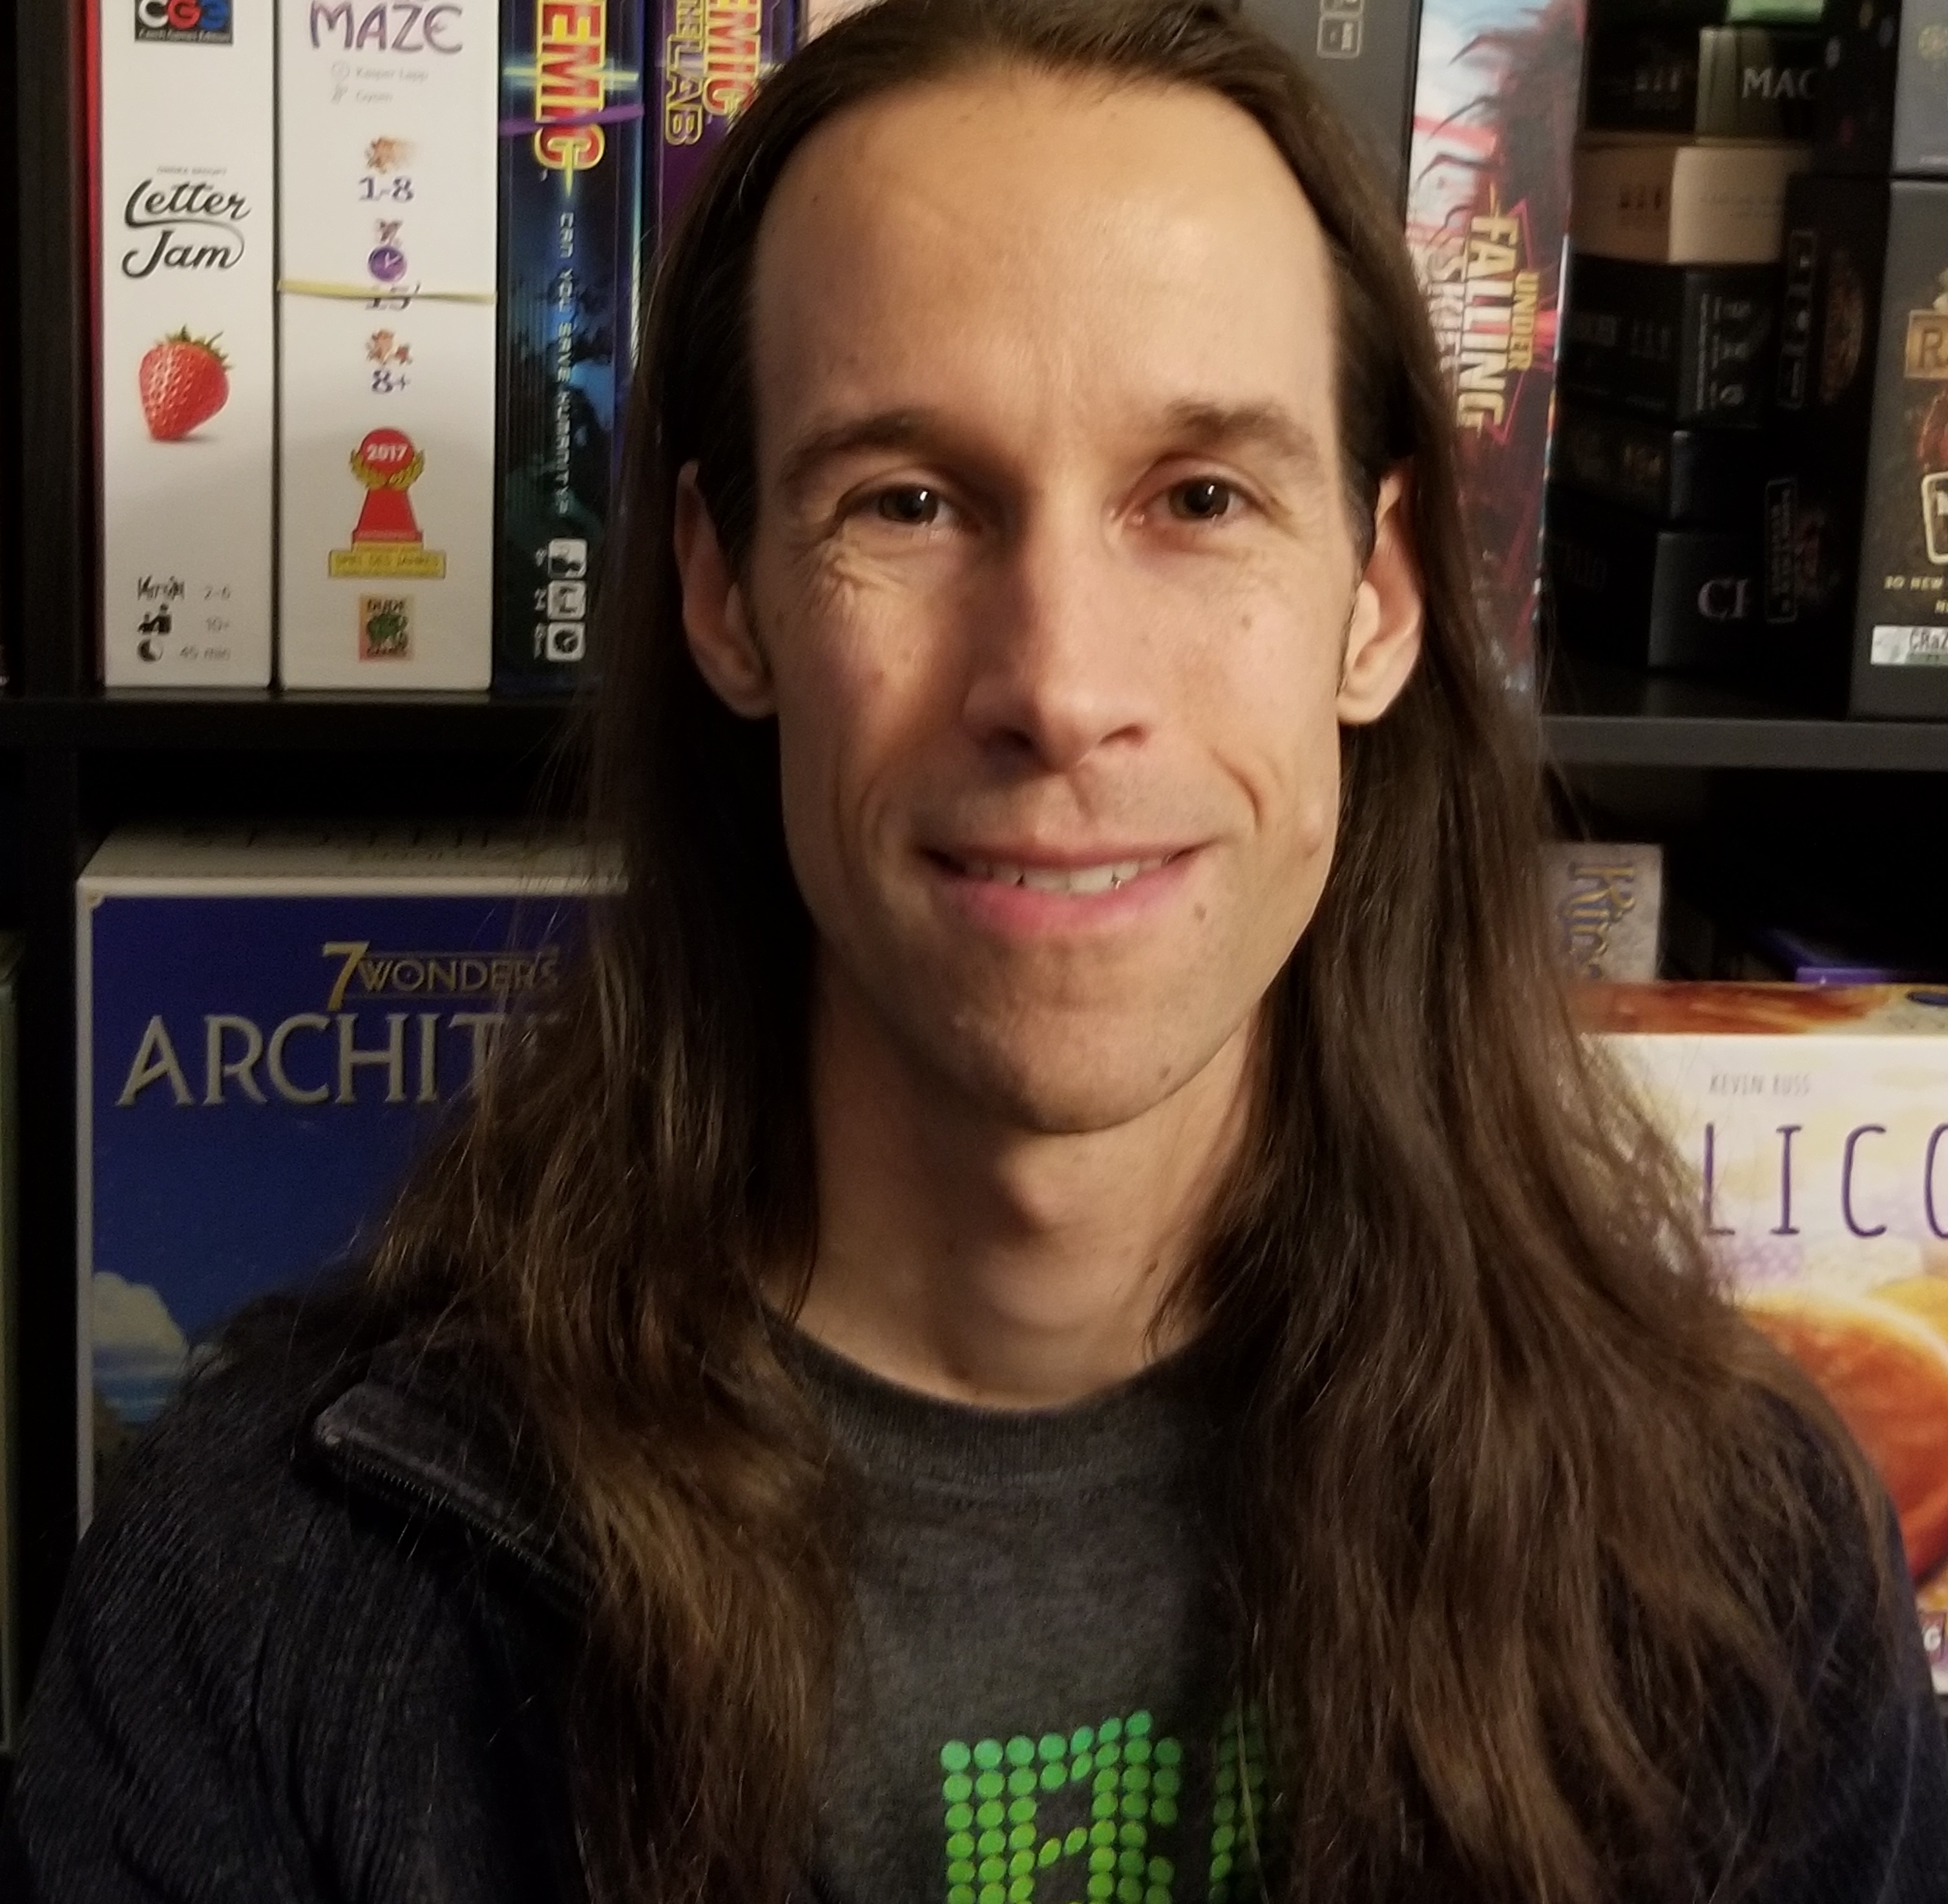 Joe Slack smiling into the camera in front of a shelf full of boardgames like pandemic, 7 Wonders and more